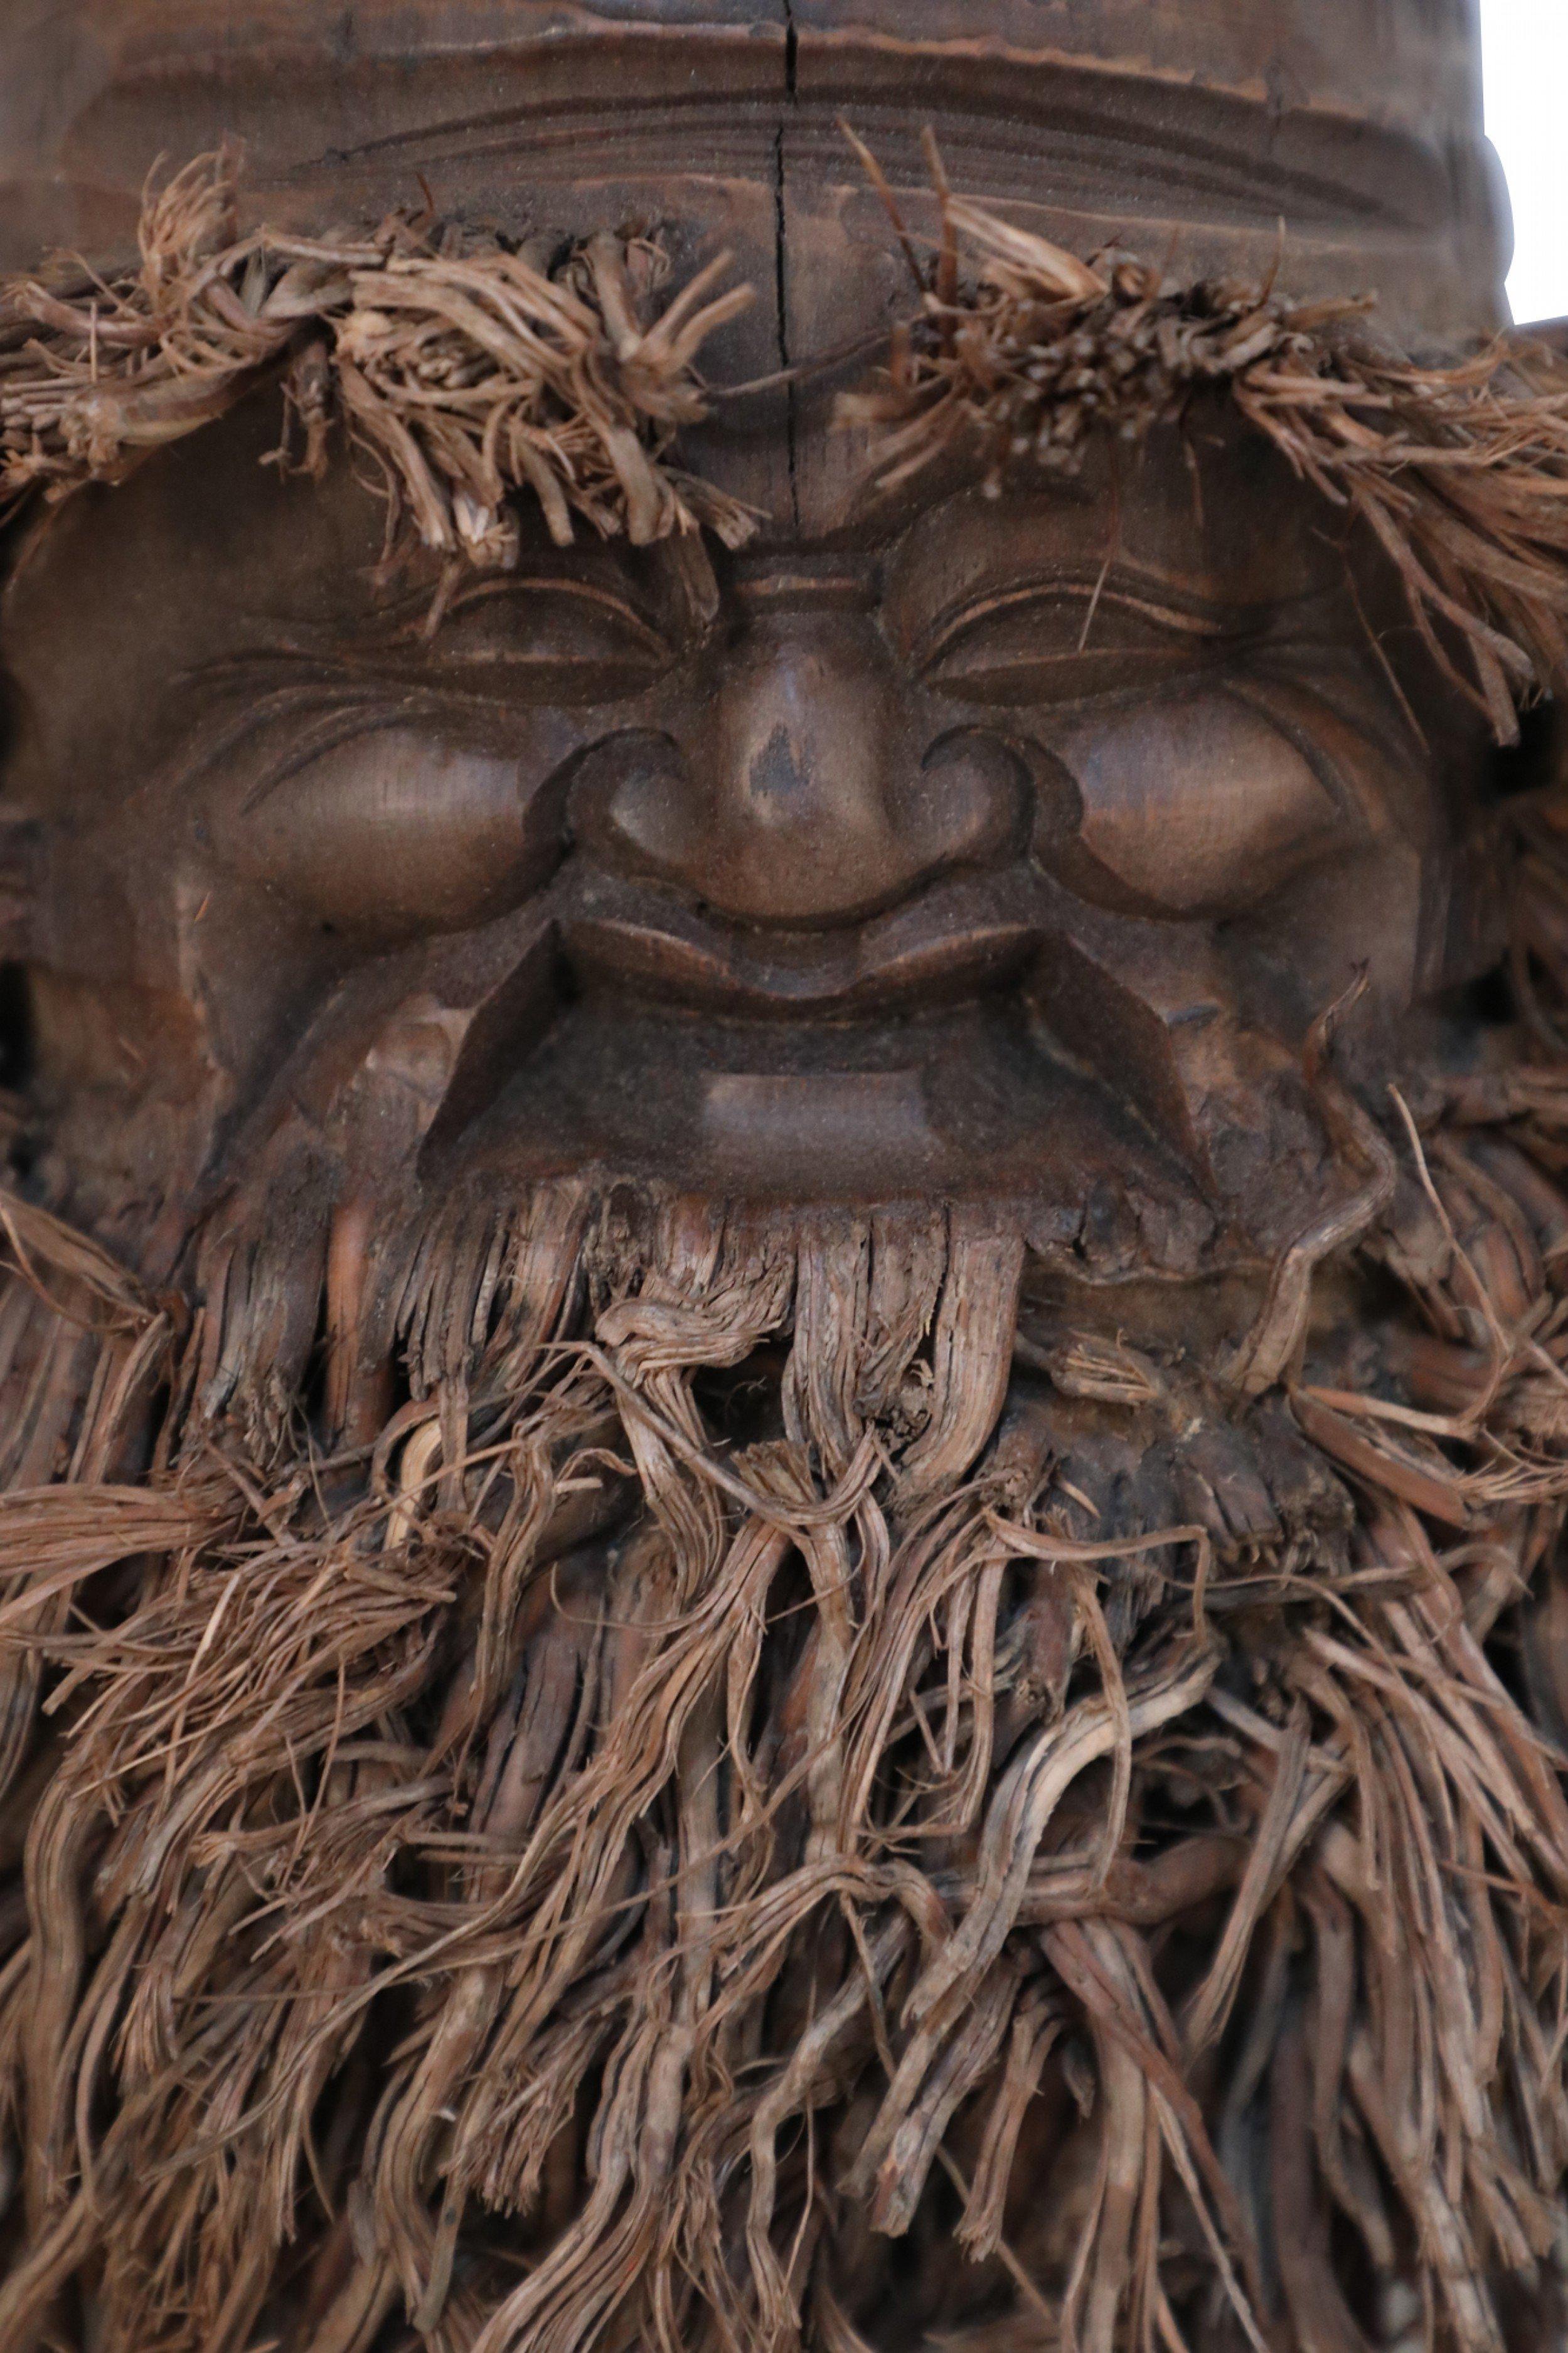 Chinese wall plaque made from a bamboo root carved in the shape of a smiling face with a bamboo root fiber beard.
     